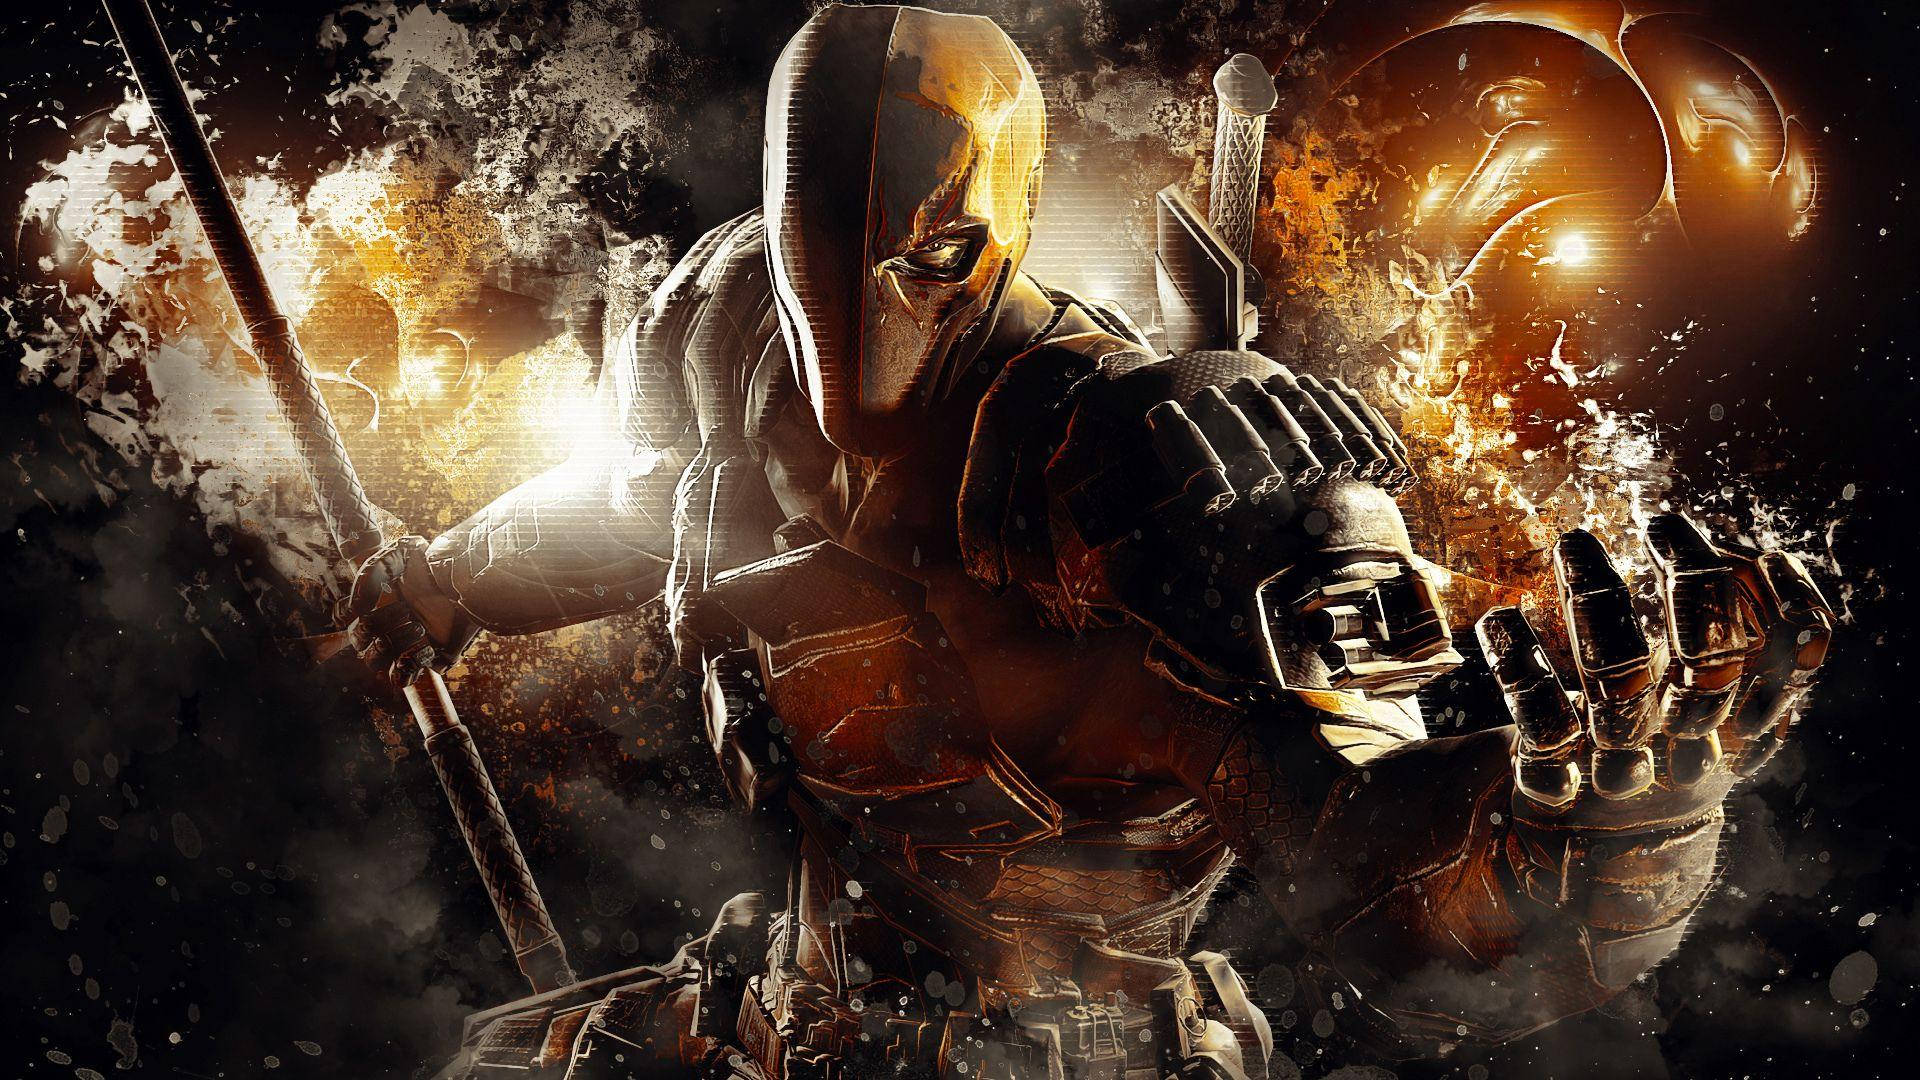 1920x1080 Full Hd Deathstroke Surrounded By Flames Background